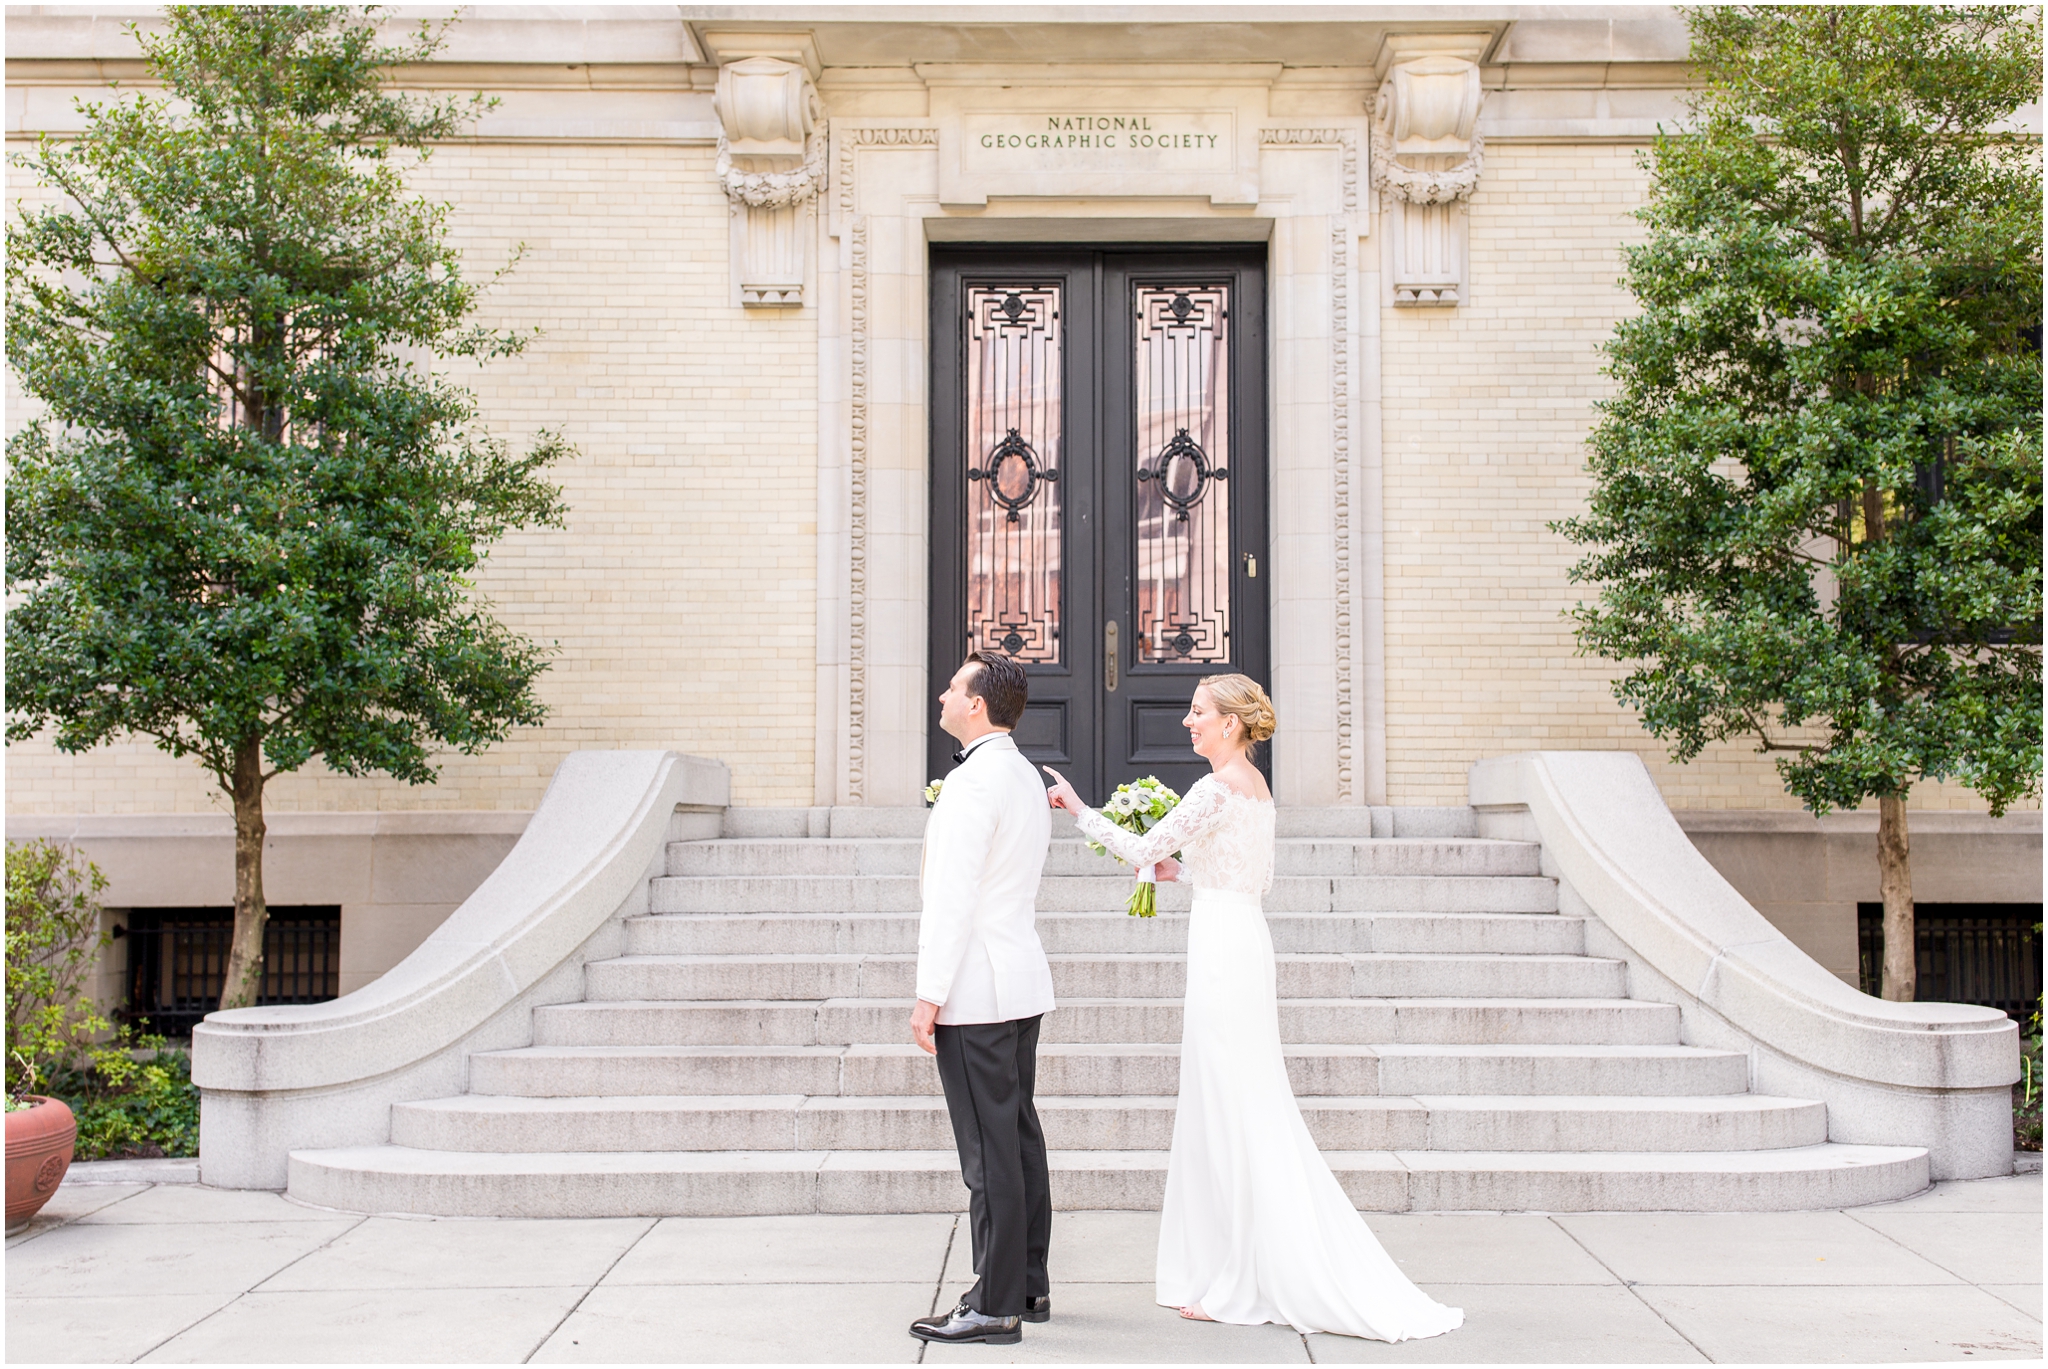 Jefferson Hotel wedding captured in Washington DC by DC wedding photographer Taylor Rose Photography. Black Tie wedding in Washington DC. Groom wore a white suit. First Look